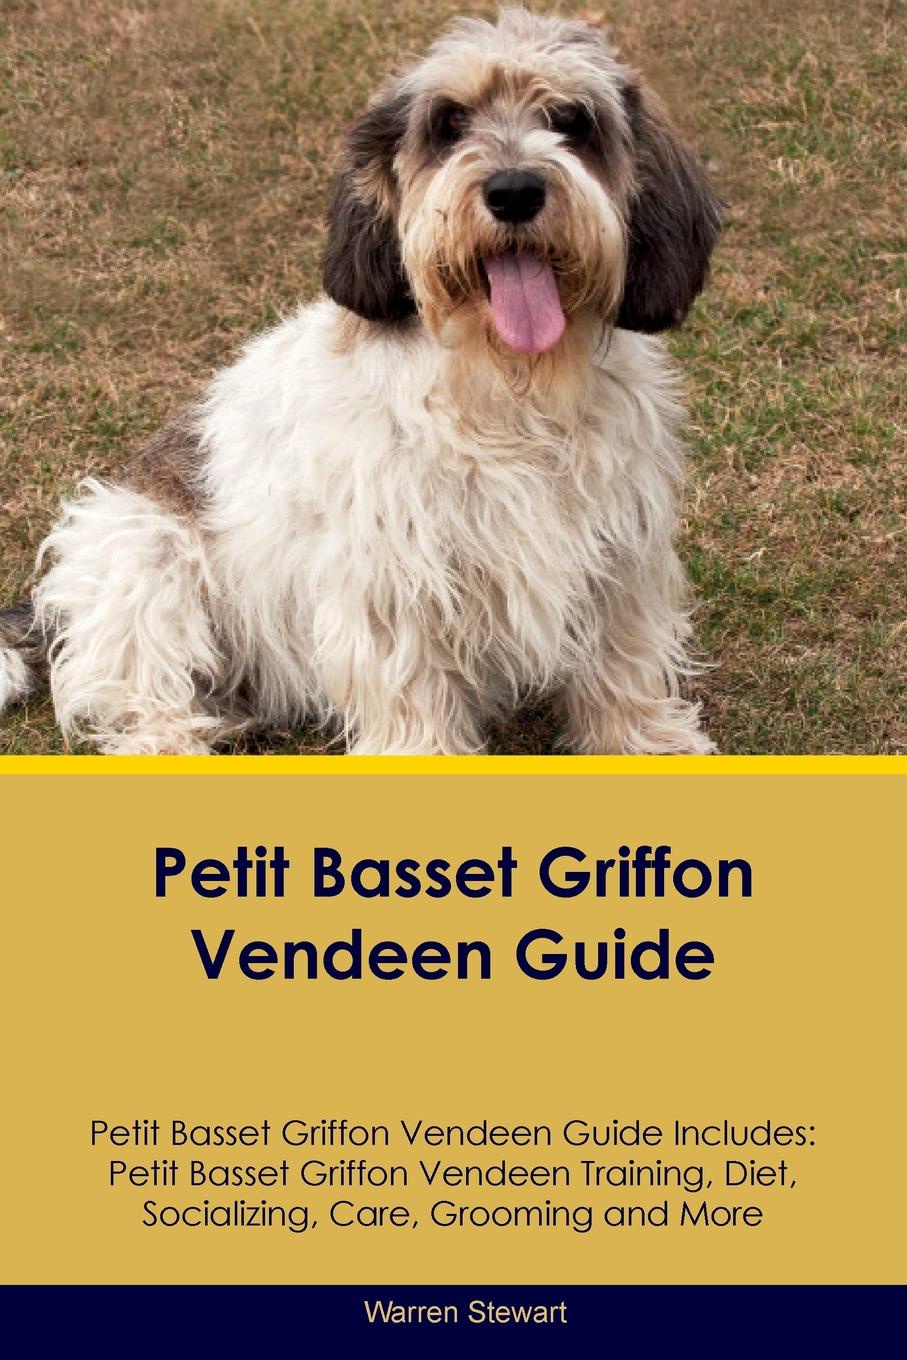 Petit Basset Griffon Vendeen Guide Petit Basset Griffon Vendeen Guide Includes. Petit Basset Griffon Vendeen Training, Diet, Socializing, Care, Grooming, Breeding and More